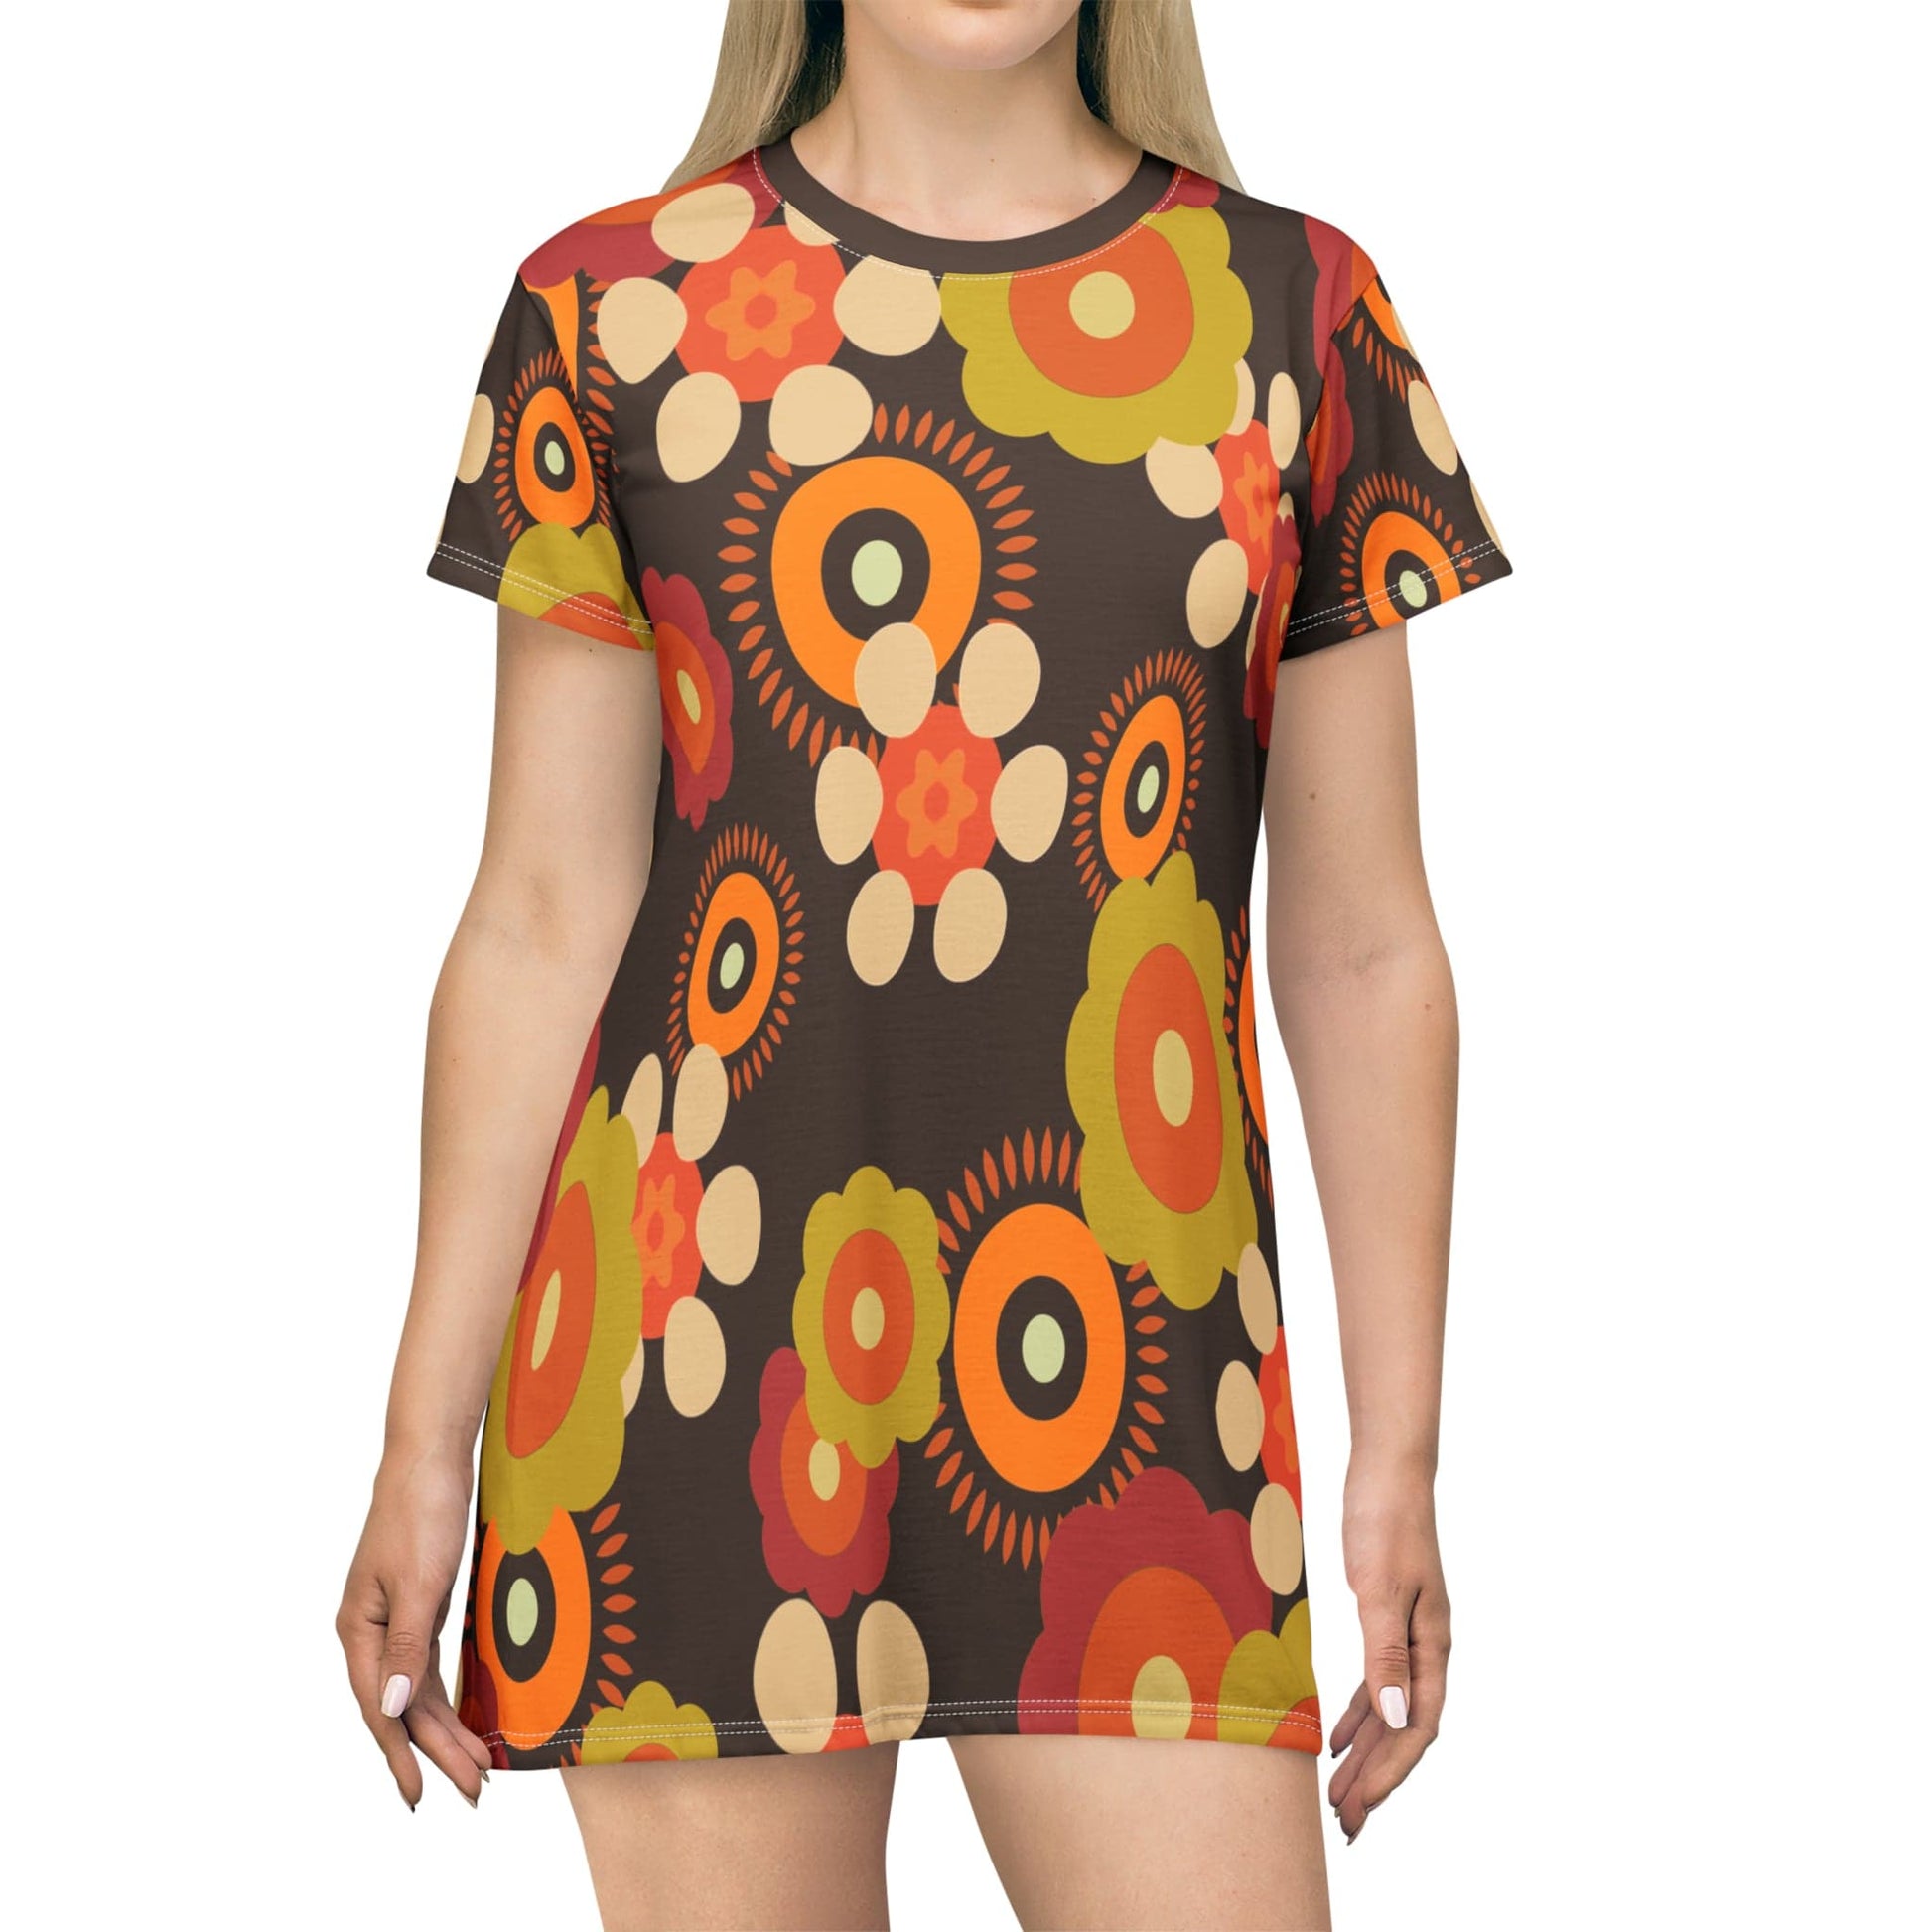 Kate McEnroe New York Retro Funky Groovy Hippie Boho Floral T-Shirt Dress, Mid Century Modern Brown, Lime Green, Mustard Yellow, Summer Party Dress, Hippie Gifts Dresses XS 24949358616856388023